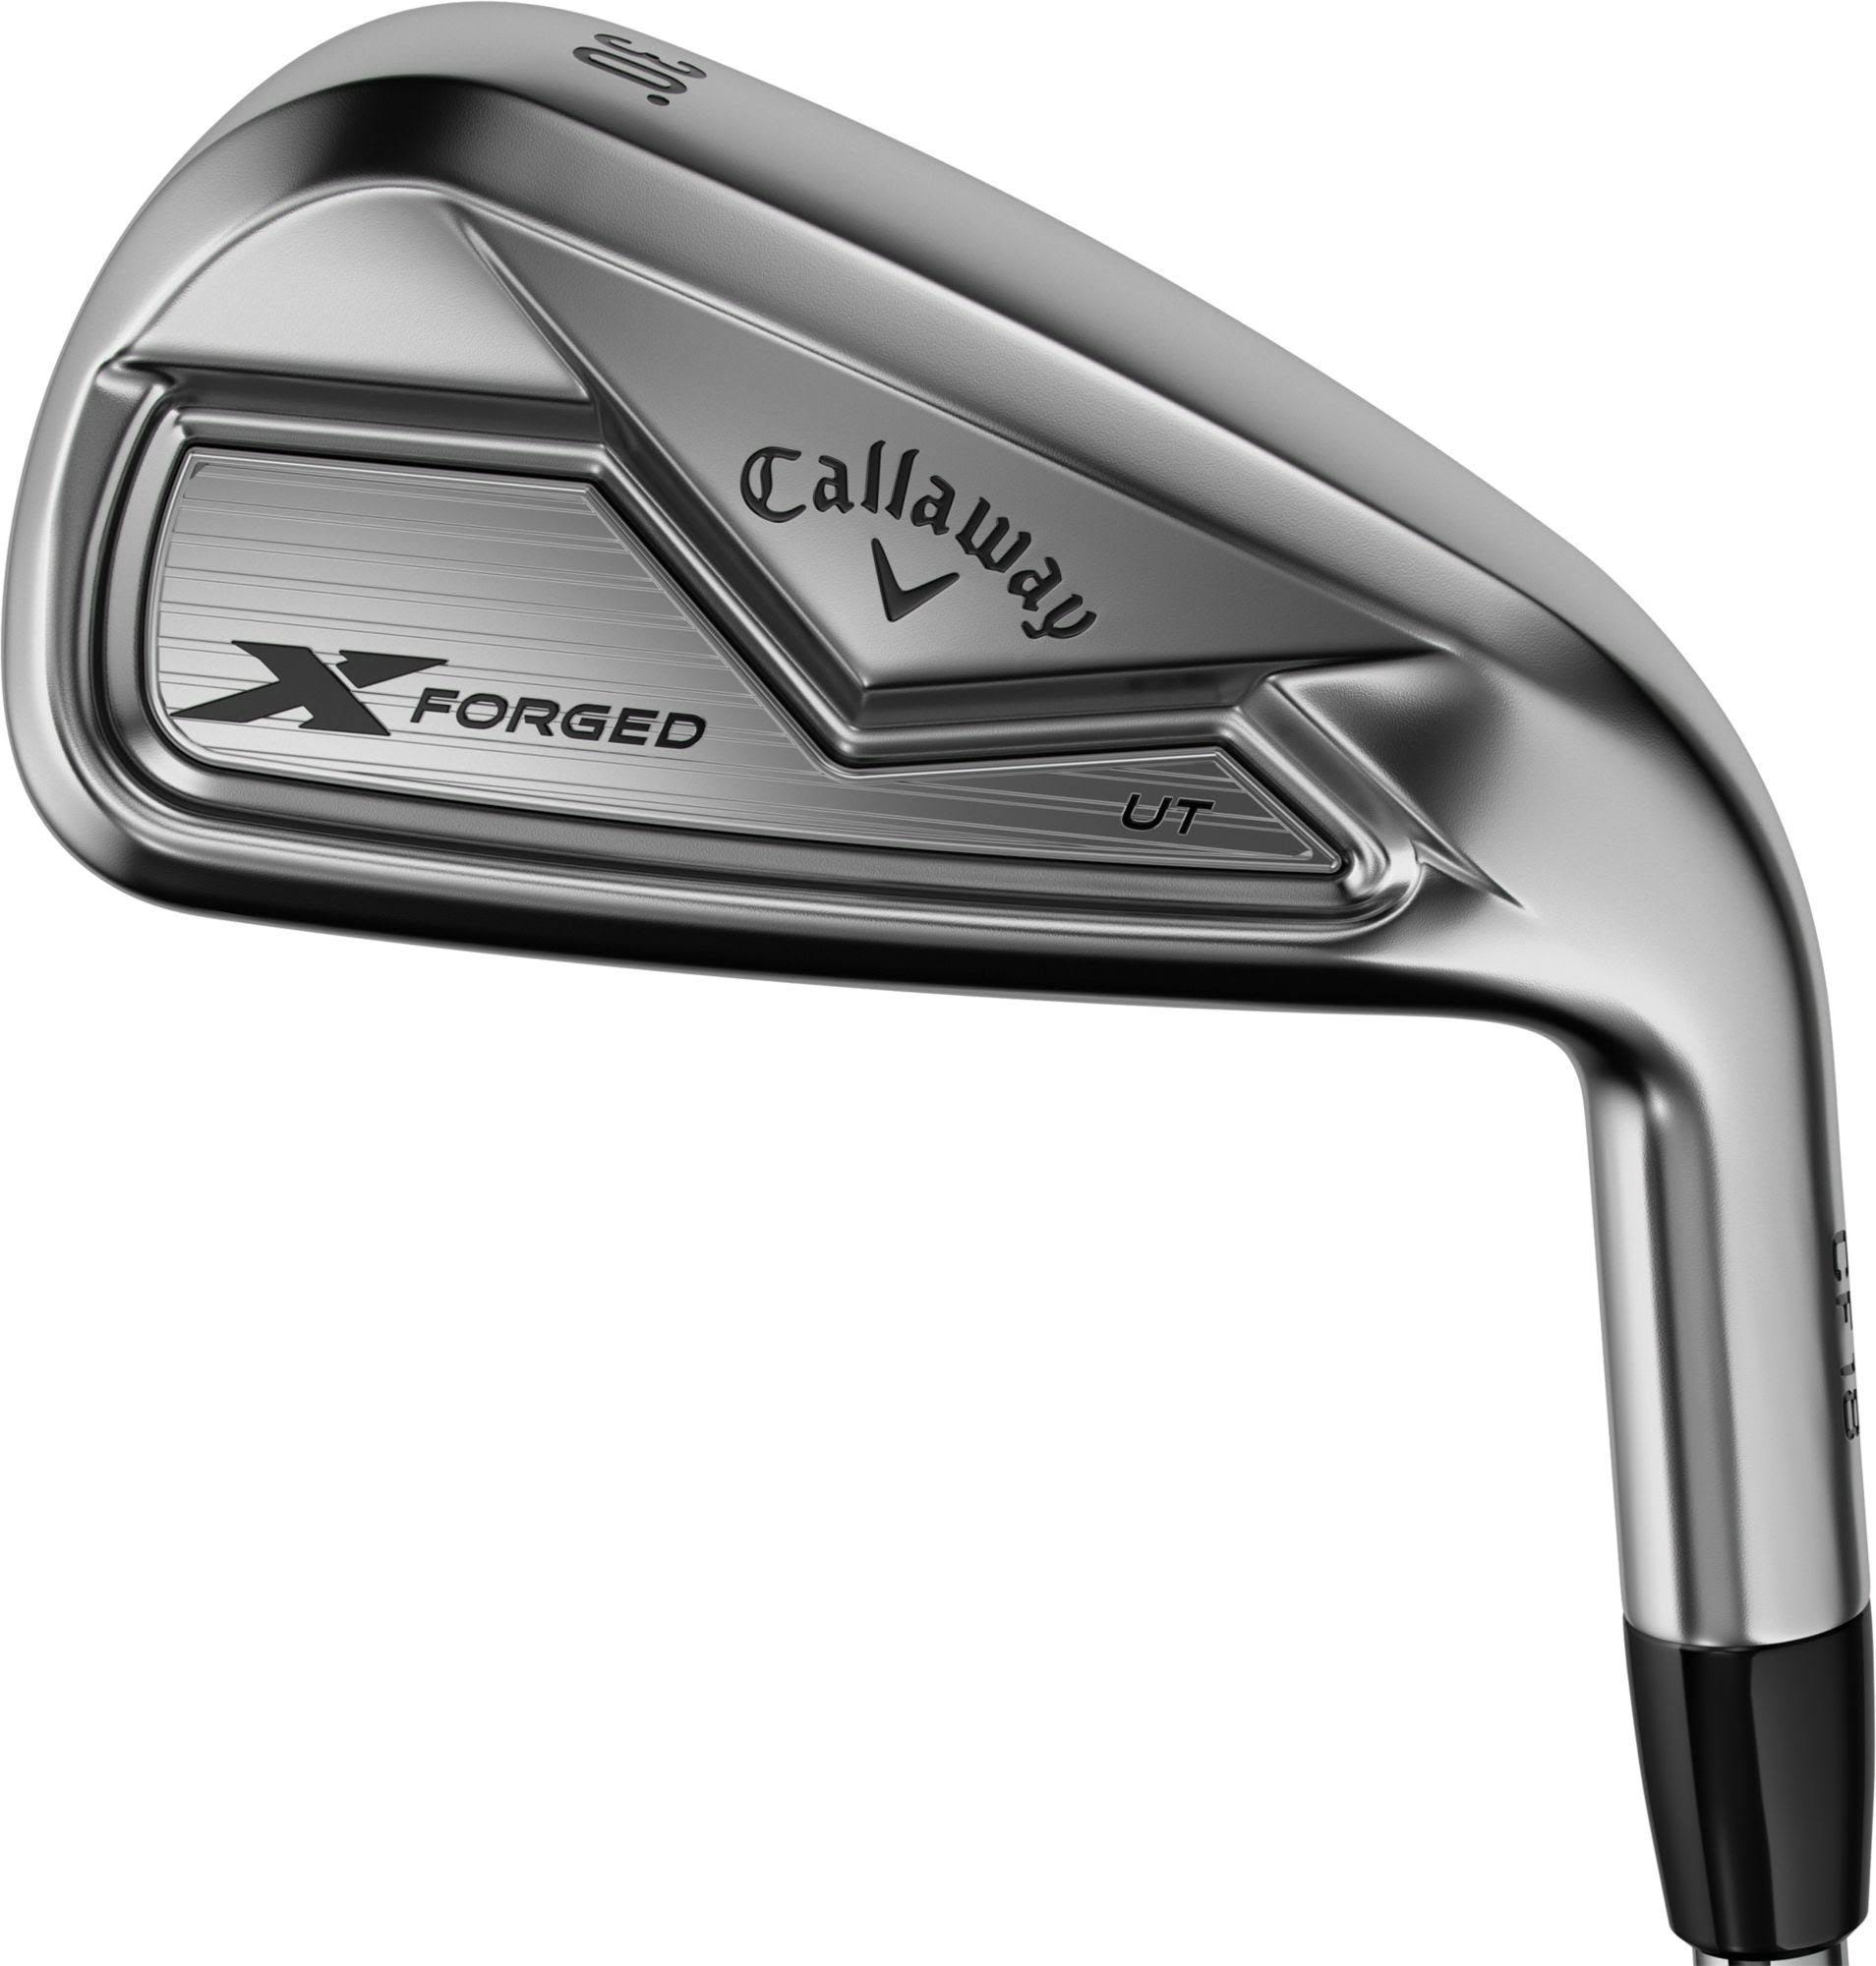 Callaway X-Forged Utility Irons for Enhanced Performance and Distance | Image